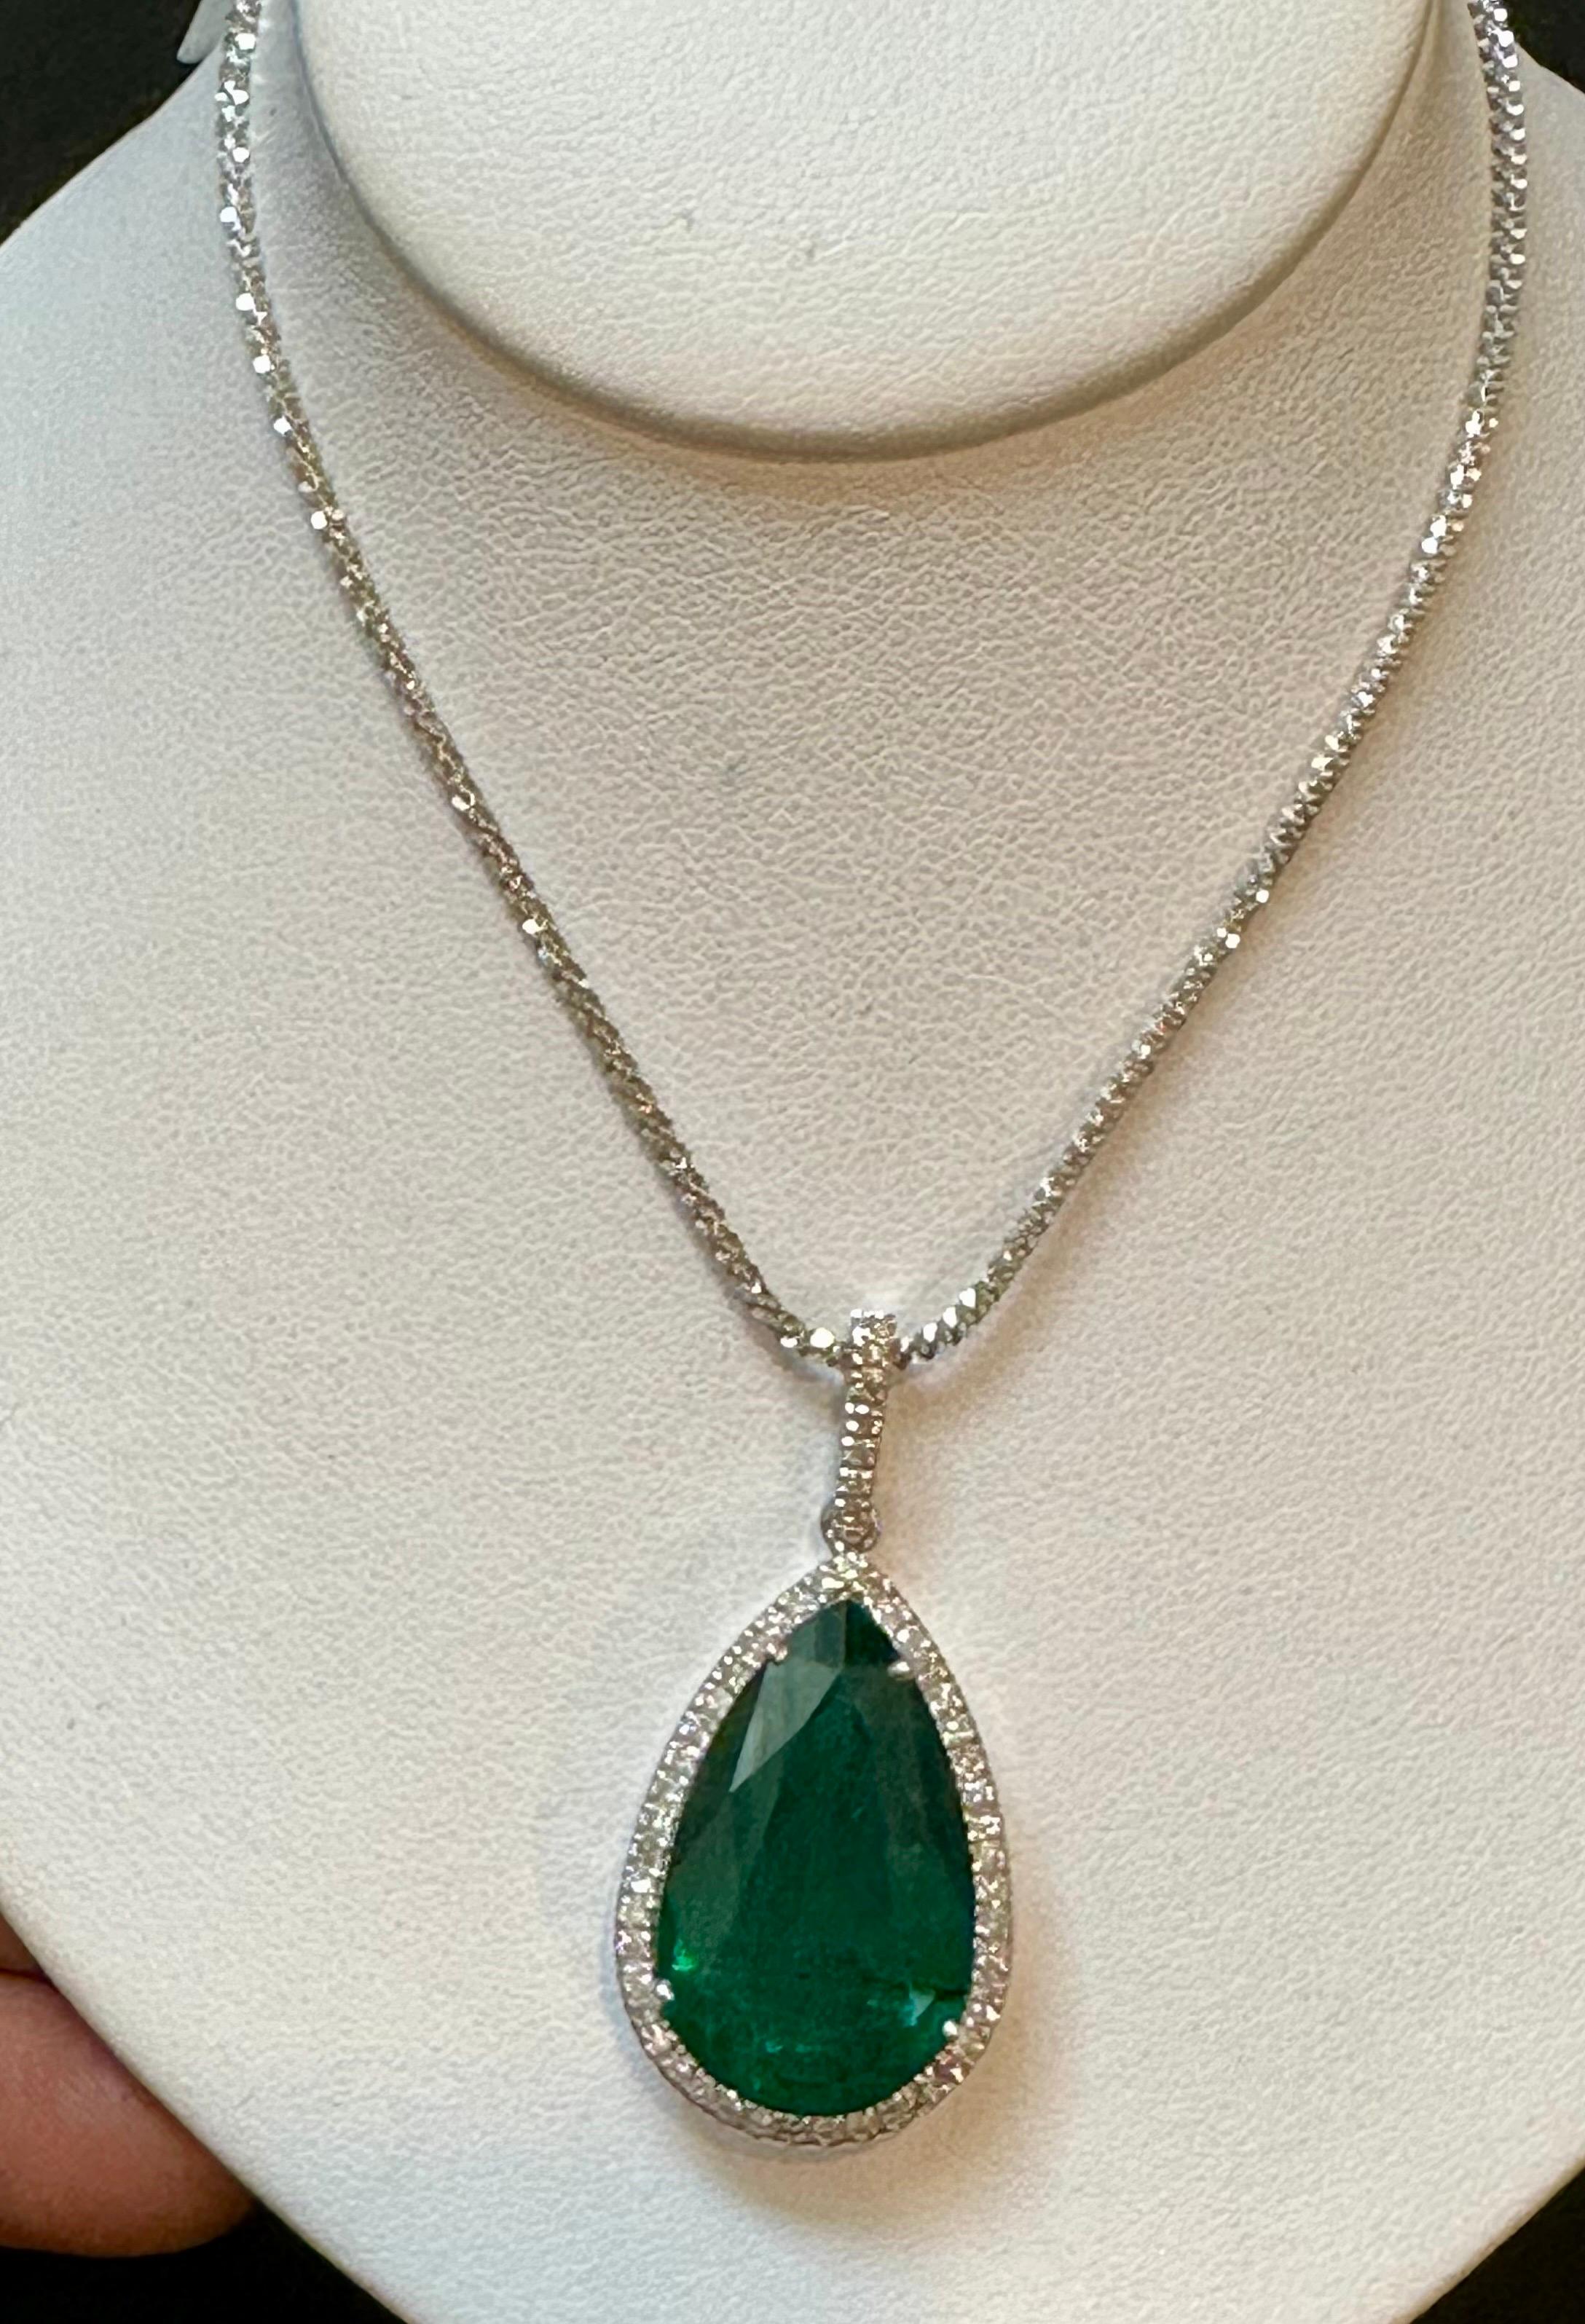 19 Ct Pear Cut Emerald & 1 Ct Diamond Halo Pendent/Necklace 14 KW Gold Chain For Sale 10